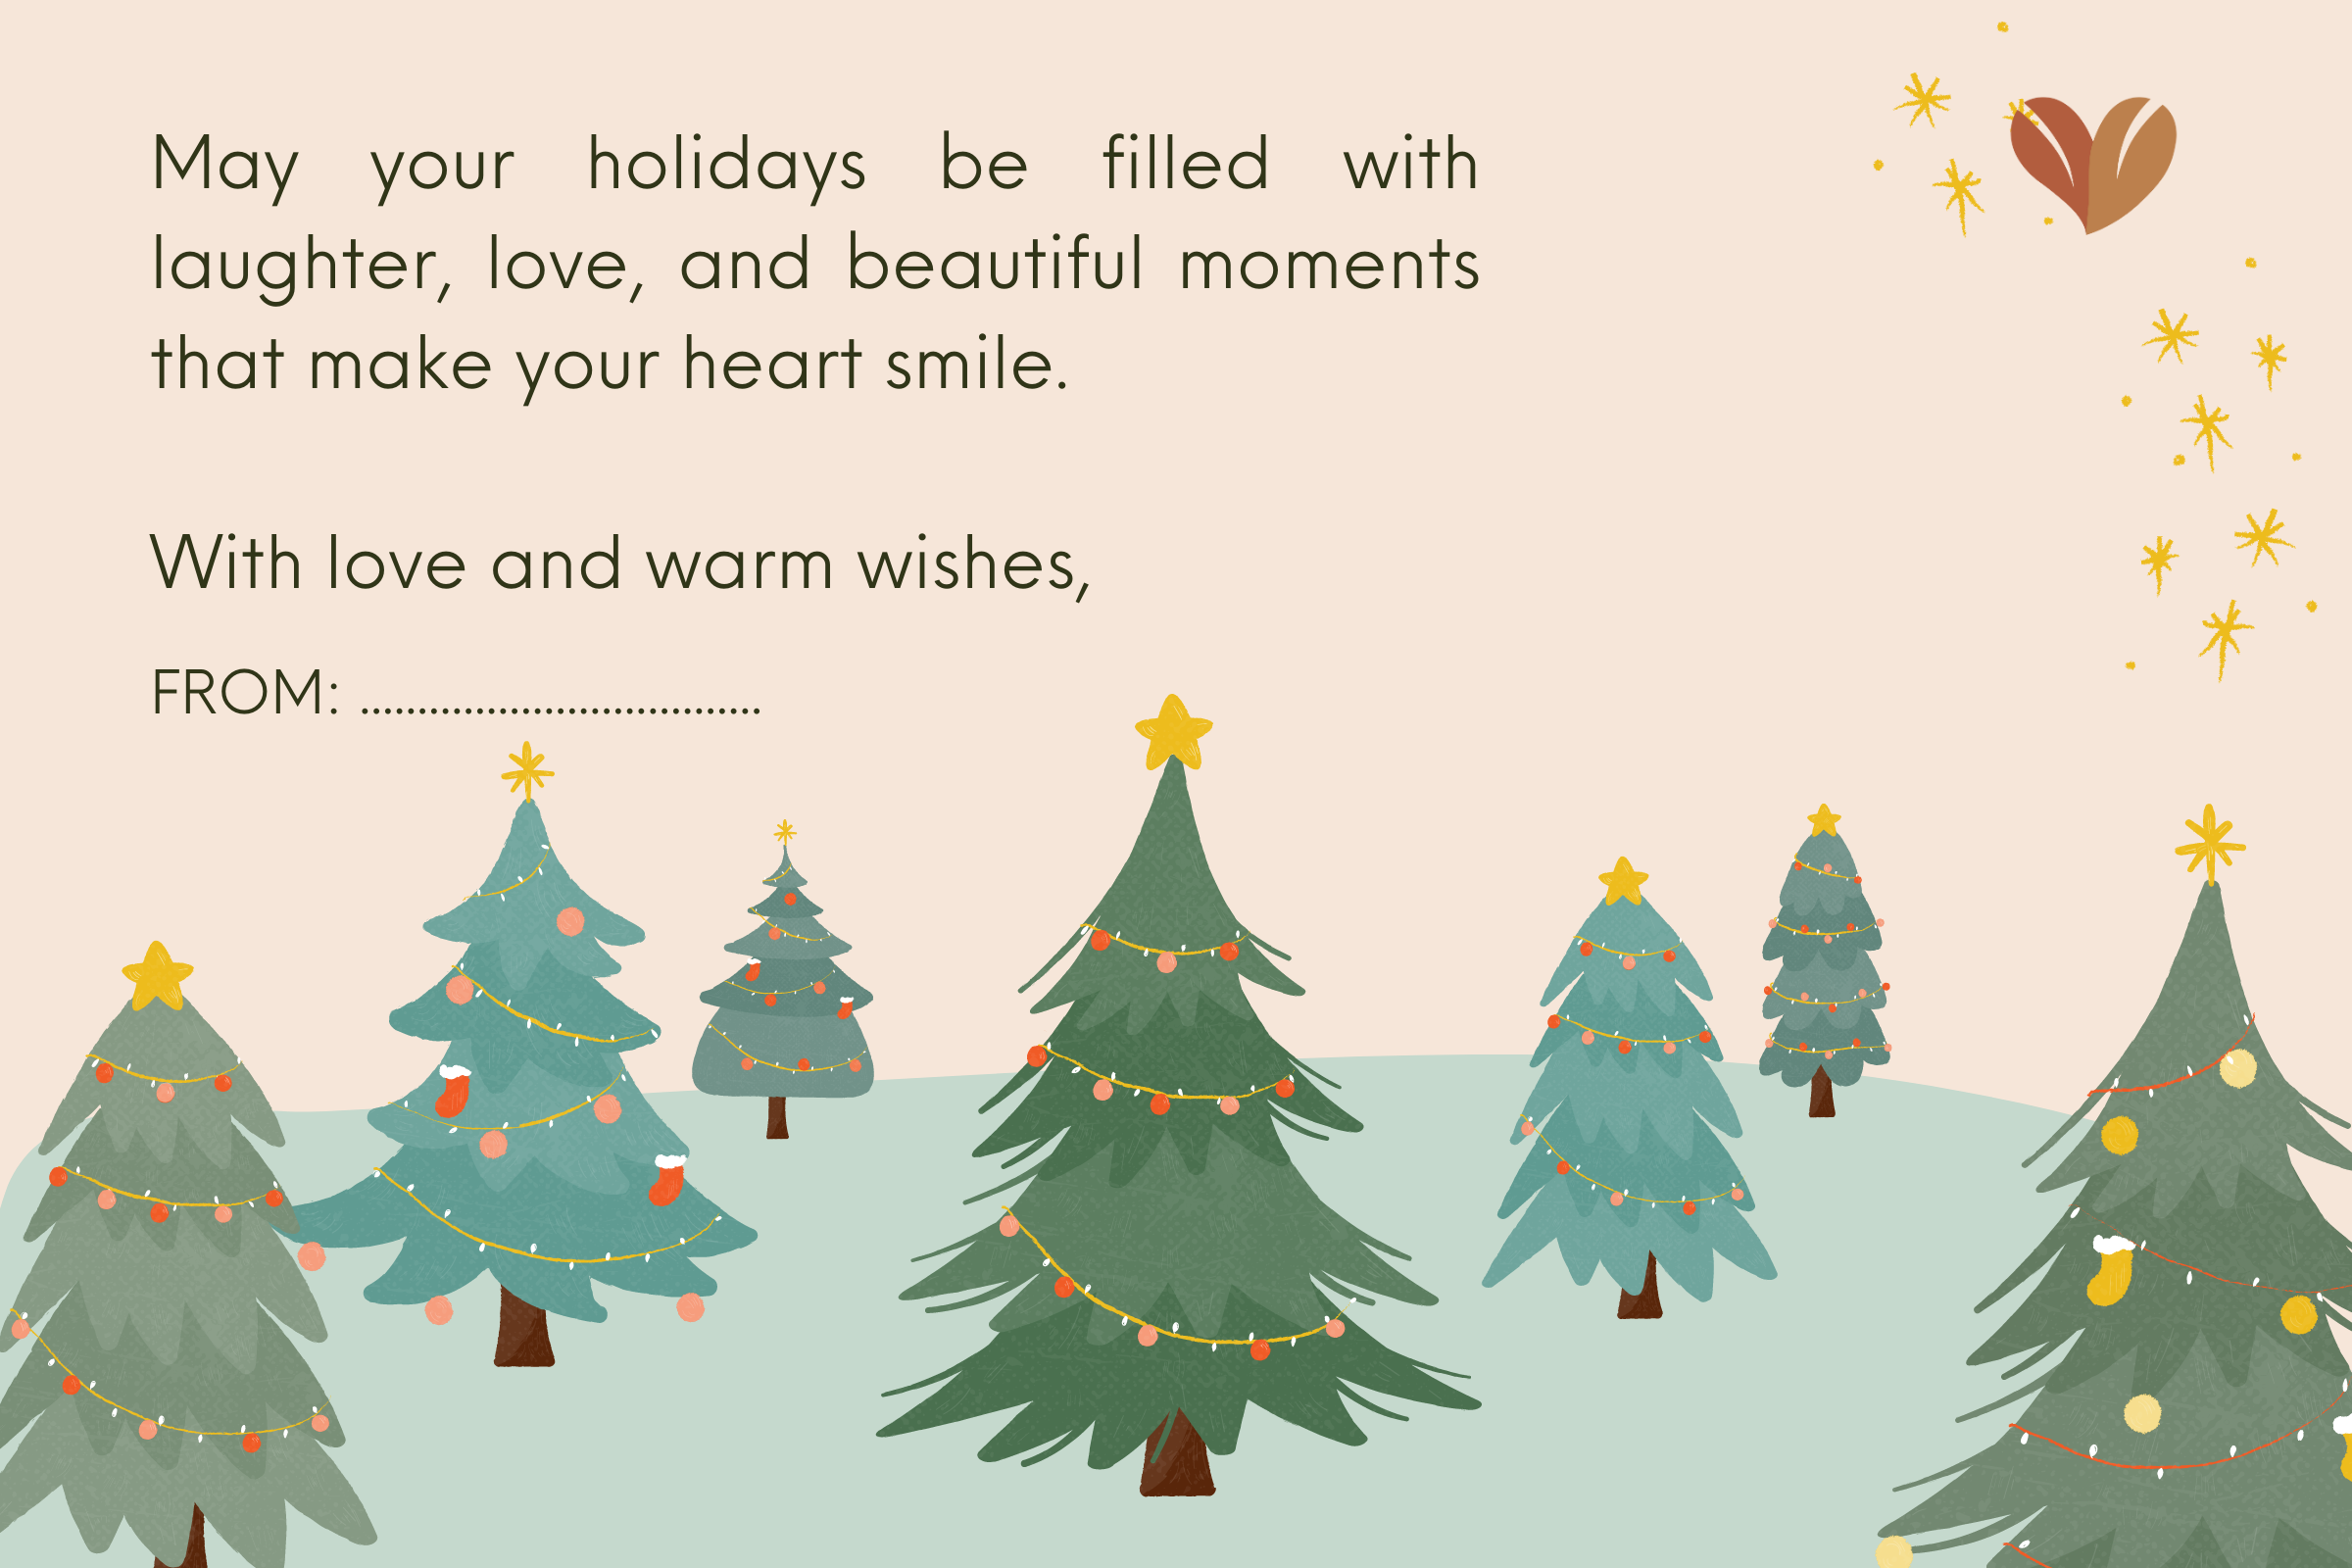 101 Holiday Card Sayings And Wishes To Write In Your Holiday Cards